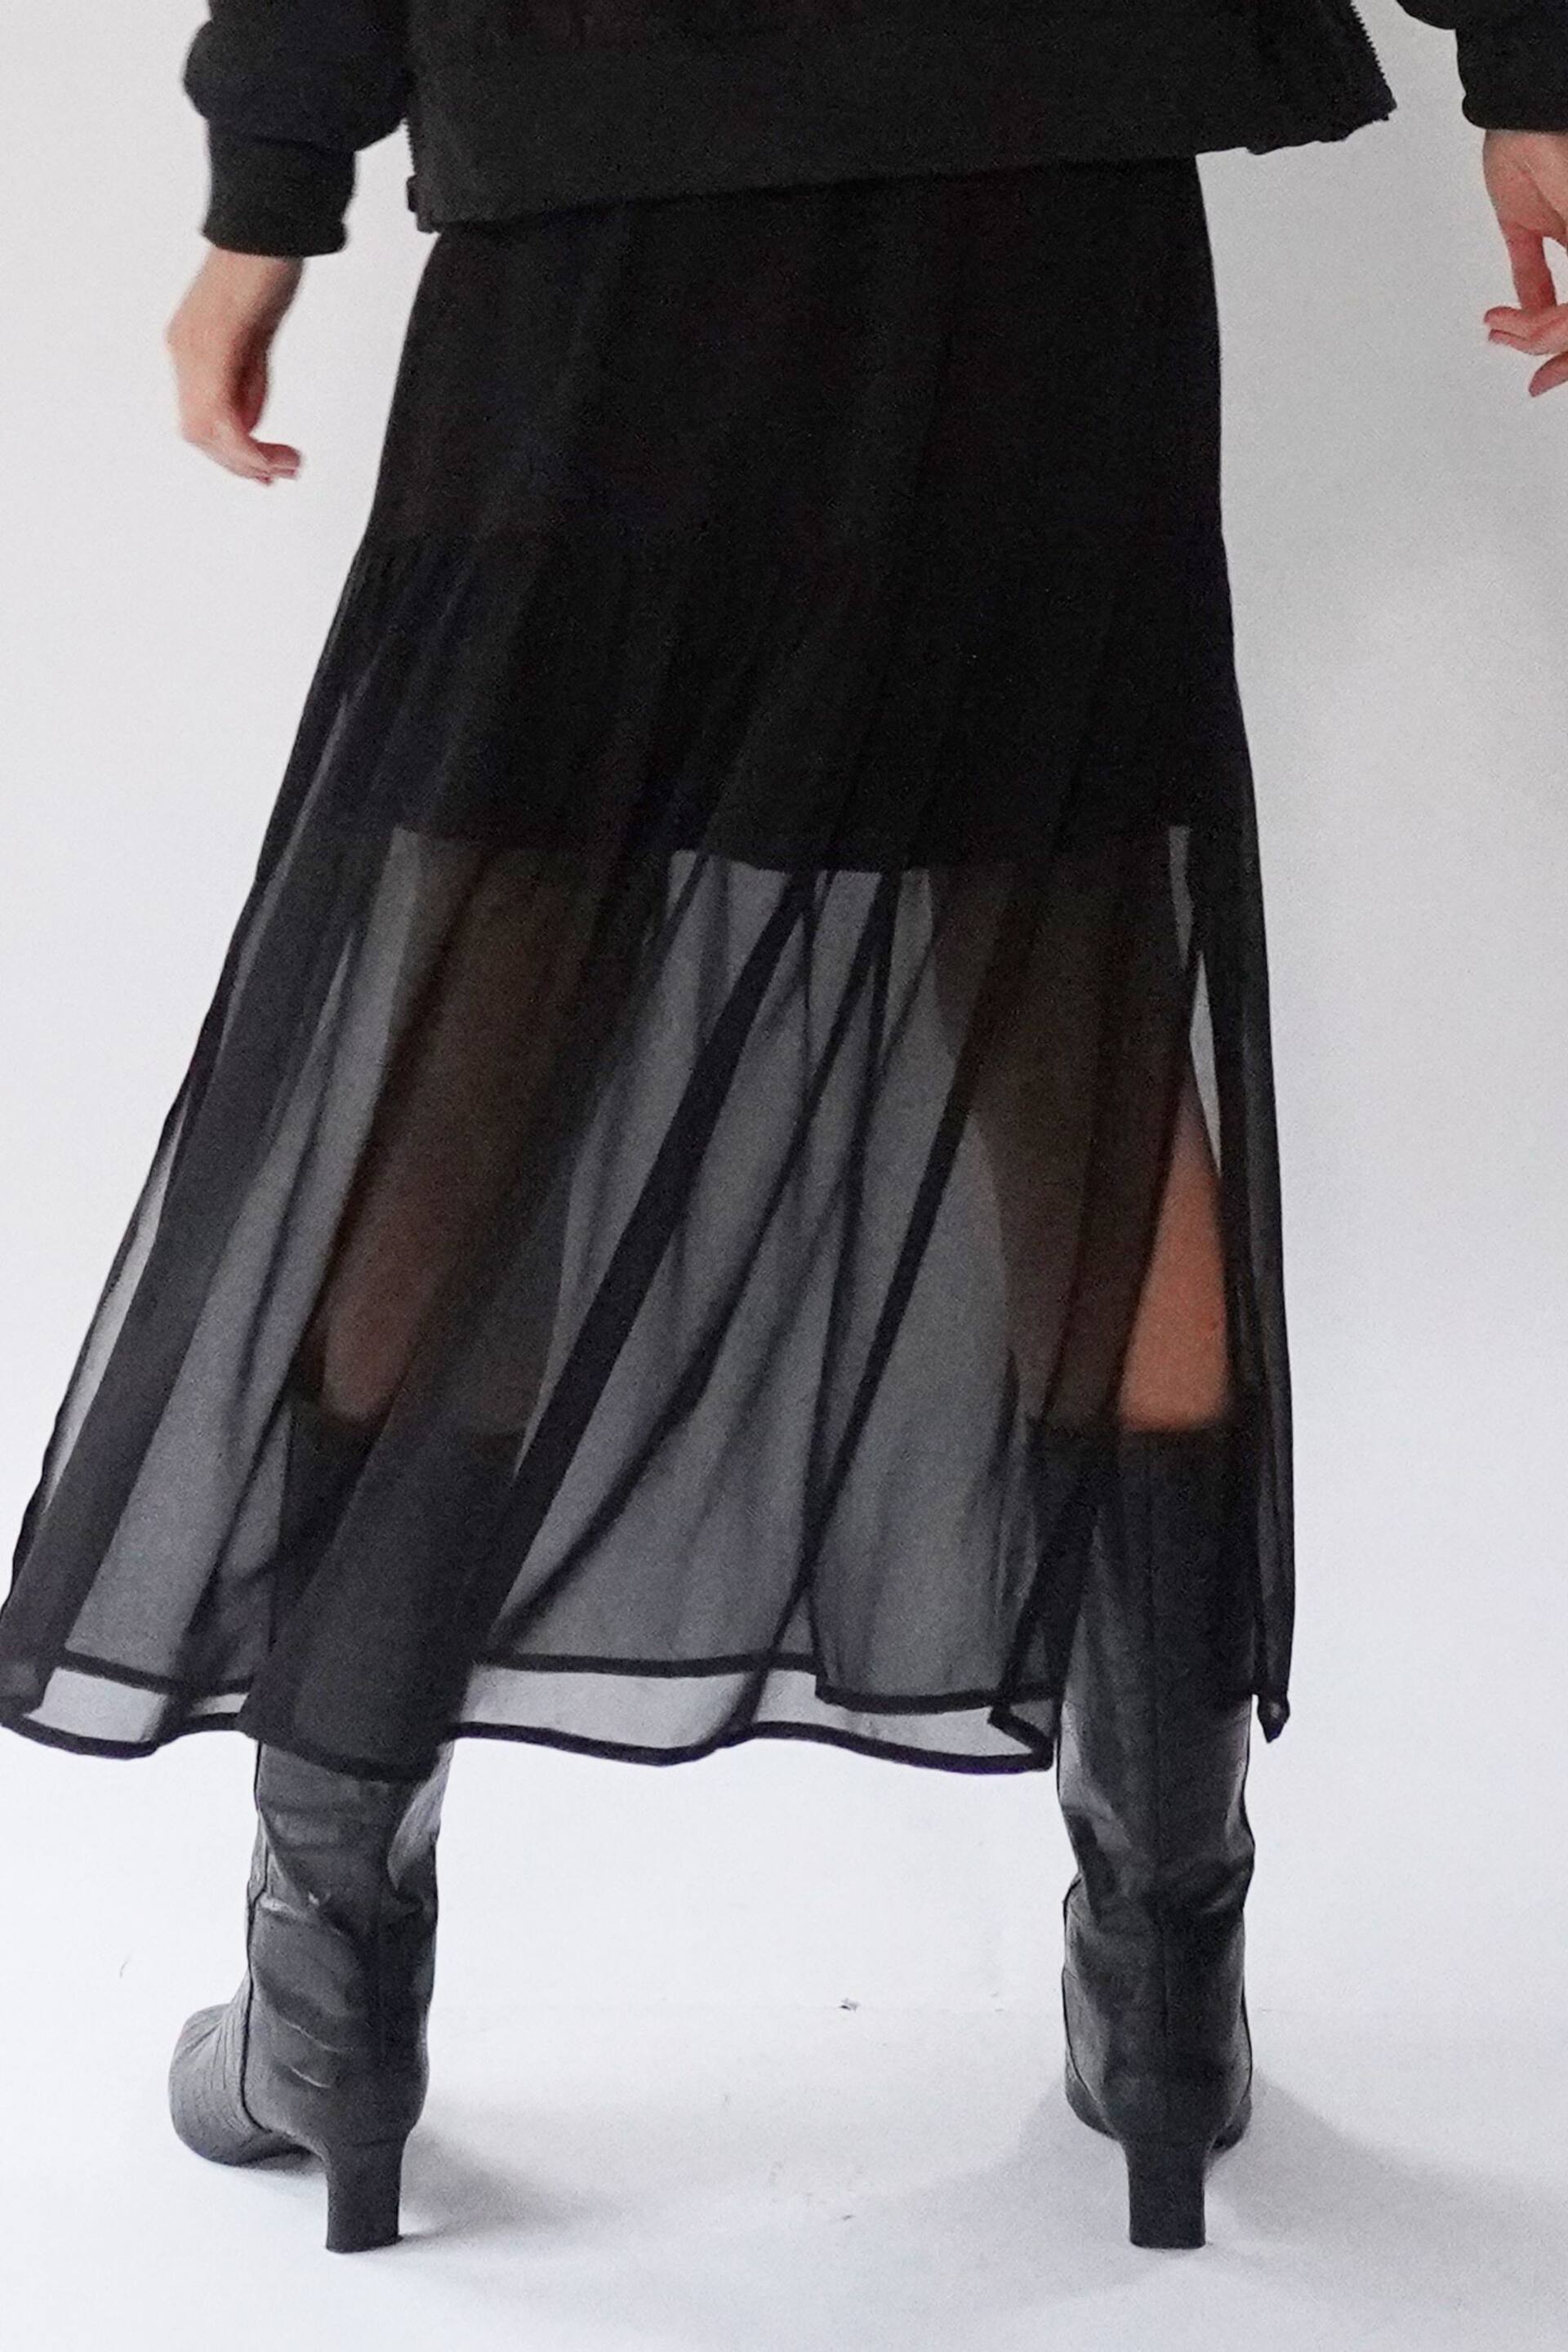 Religion Black Tiered Maxi Skirt In Sheer Georgette and Short Lining - Image 8 of 8